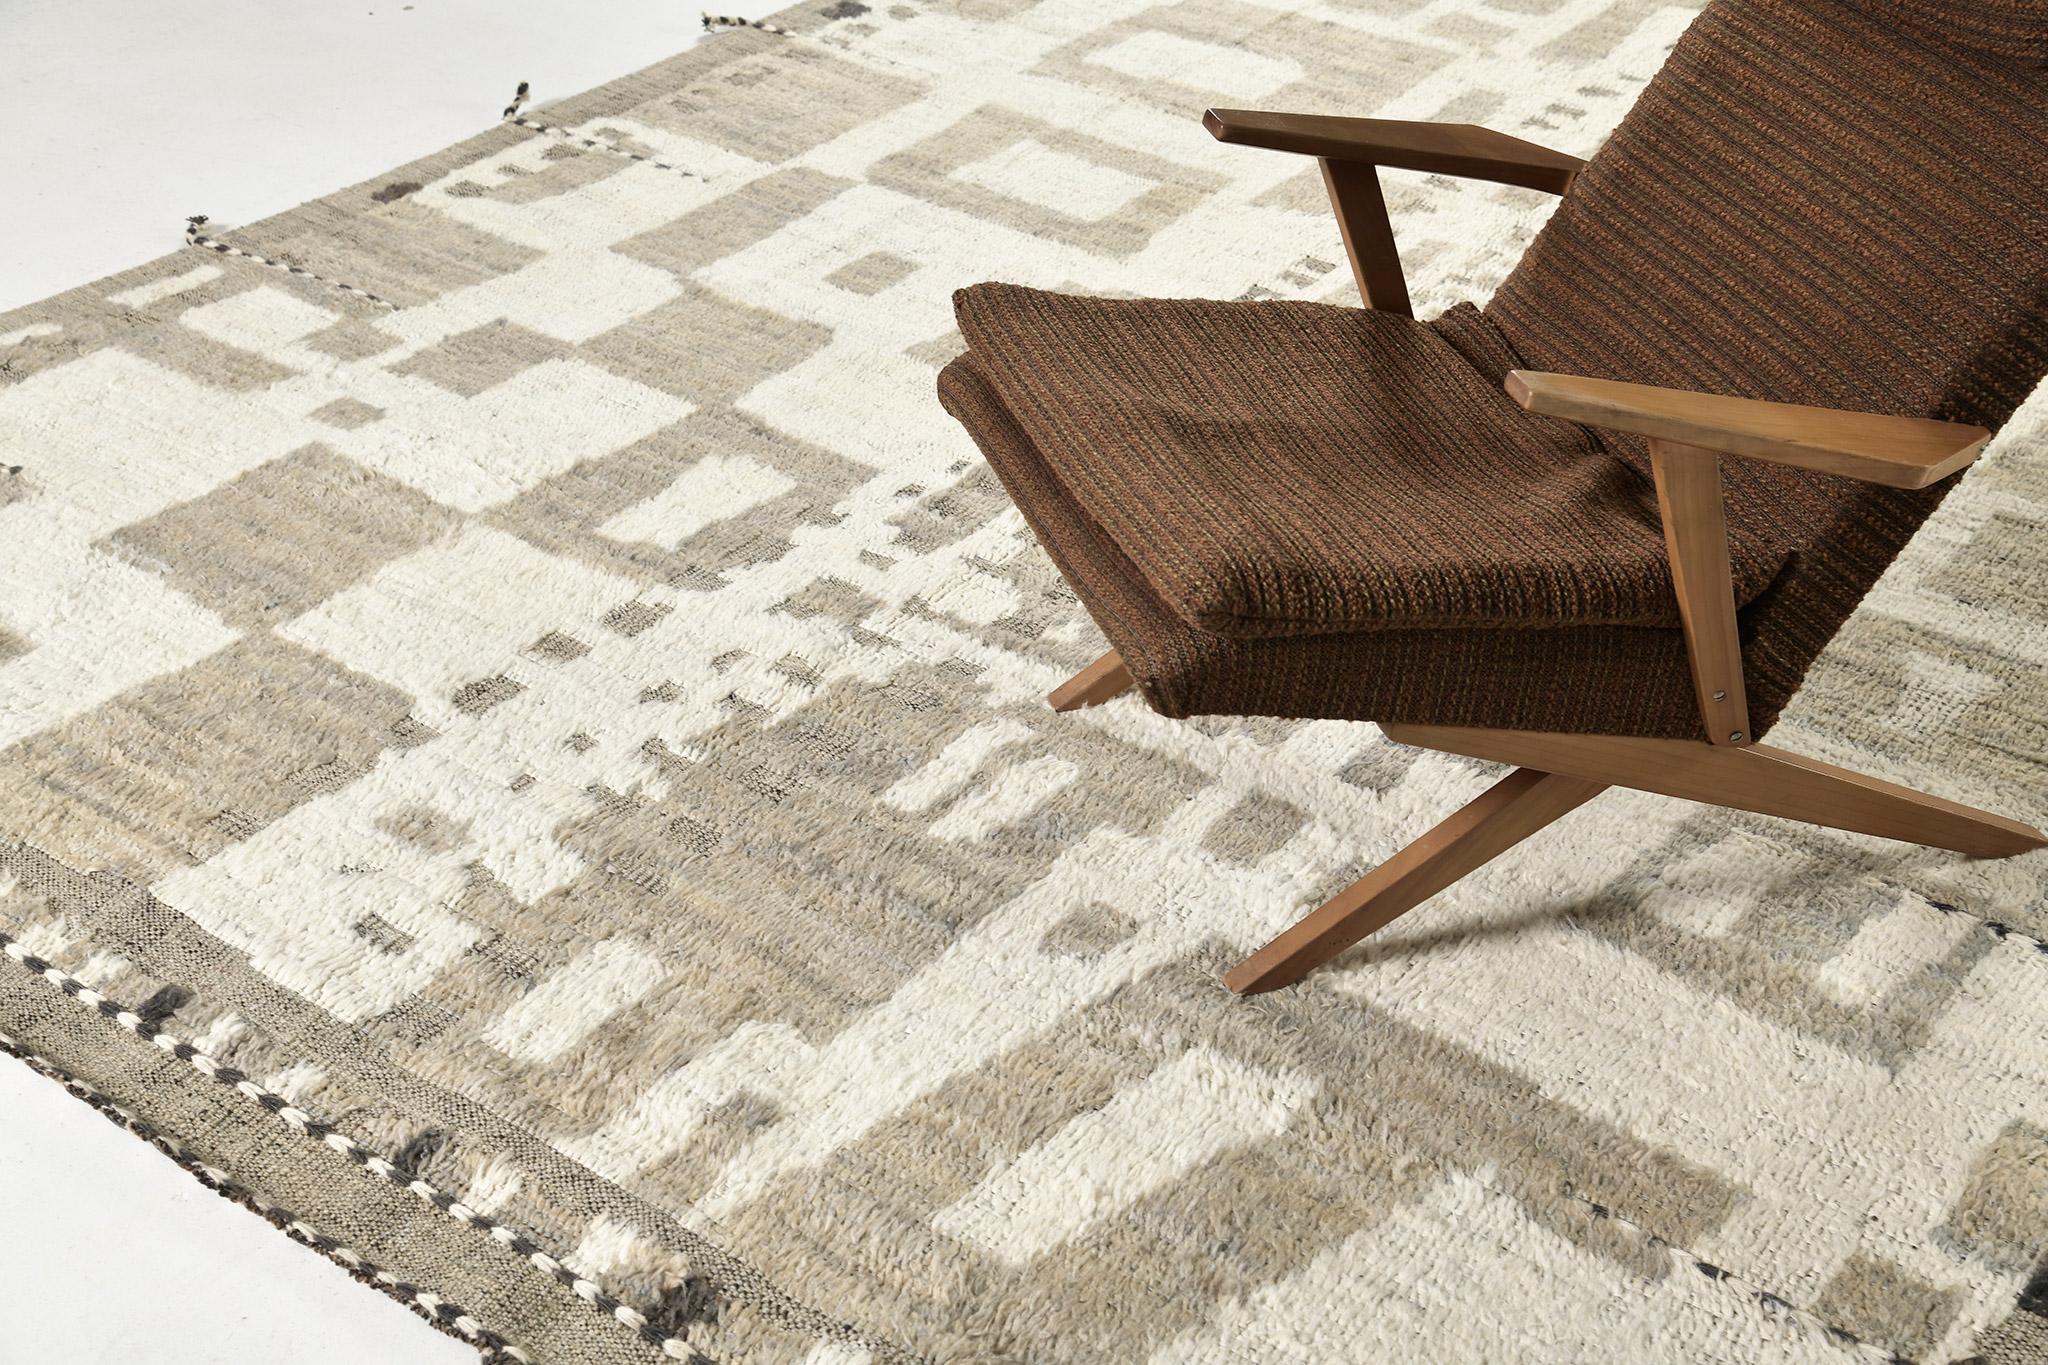 Tament is made of elegant wool and is made of noteworthy design elements. Its weaving of natural earth tones and unique design elements are what makes the Atlas Collection so unique and sought after. Mehraban's Atlas collection is noted for its